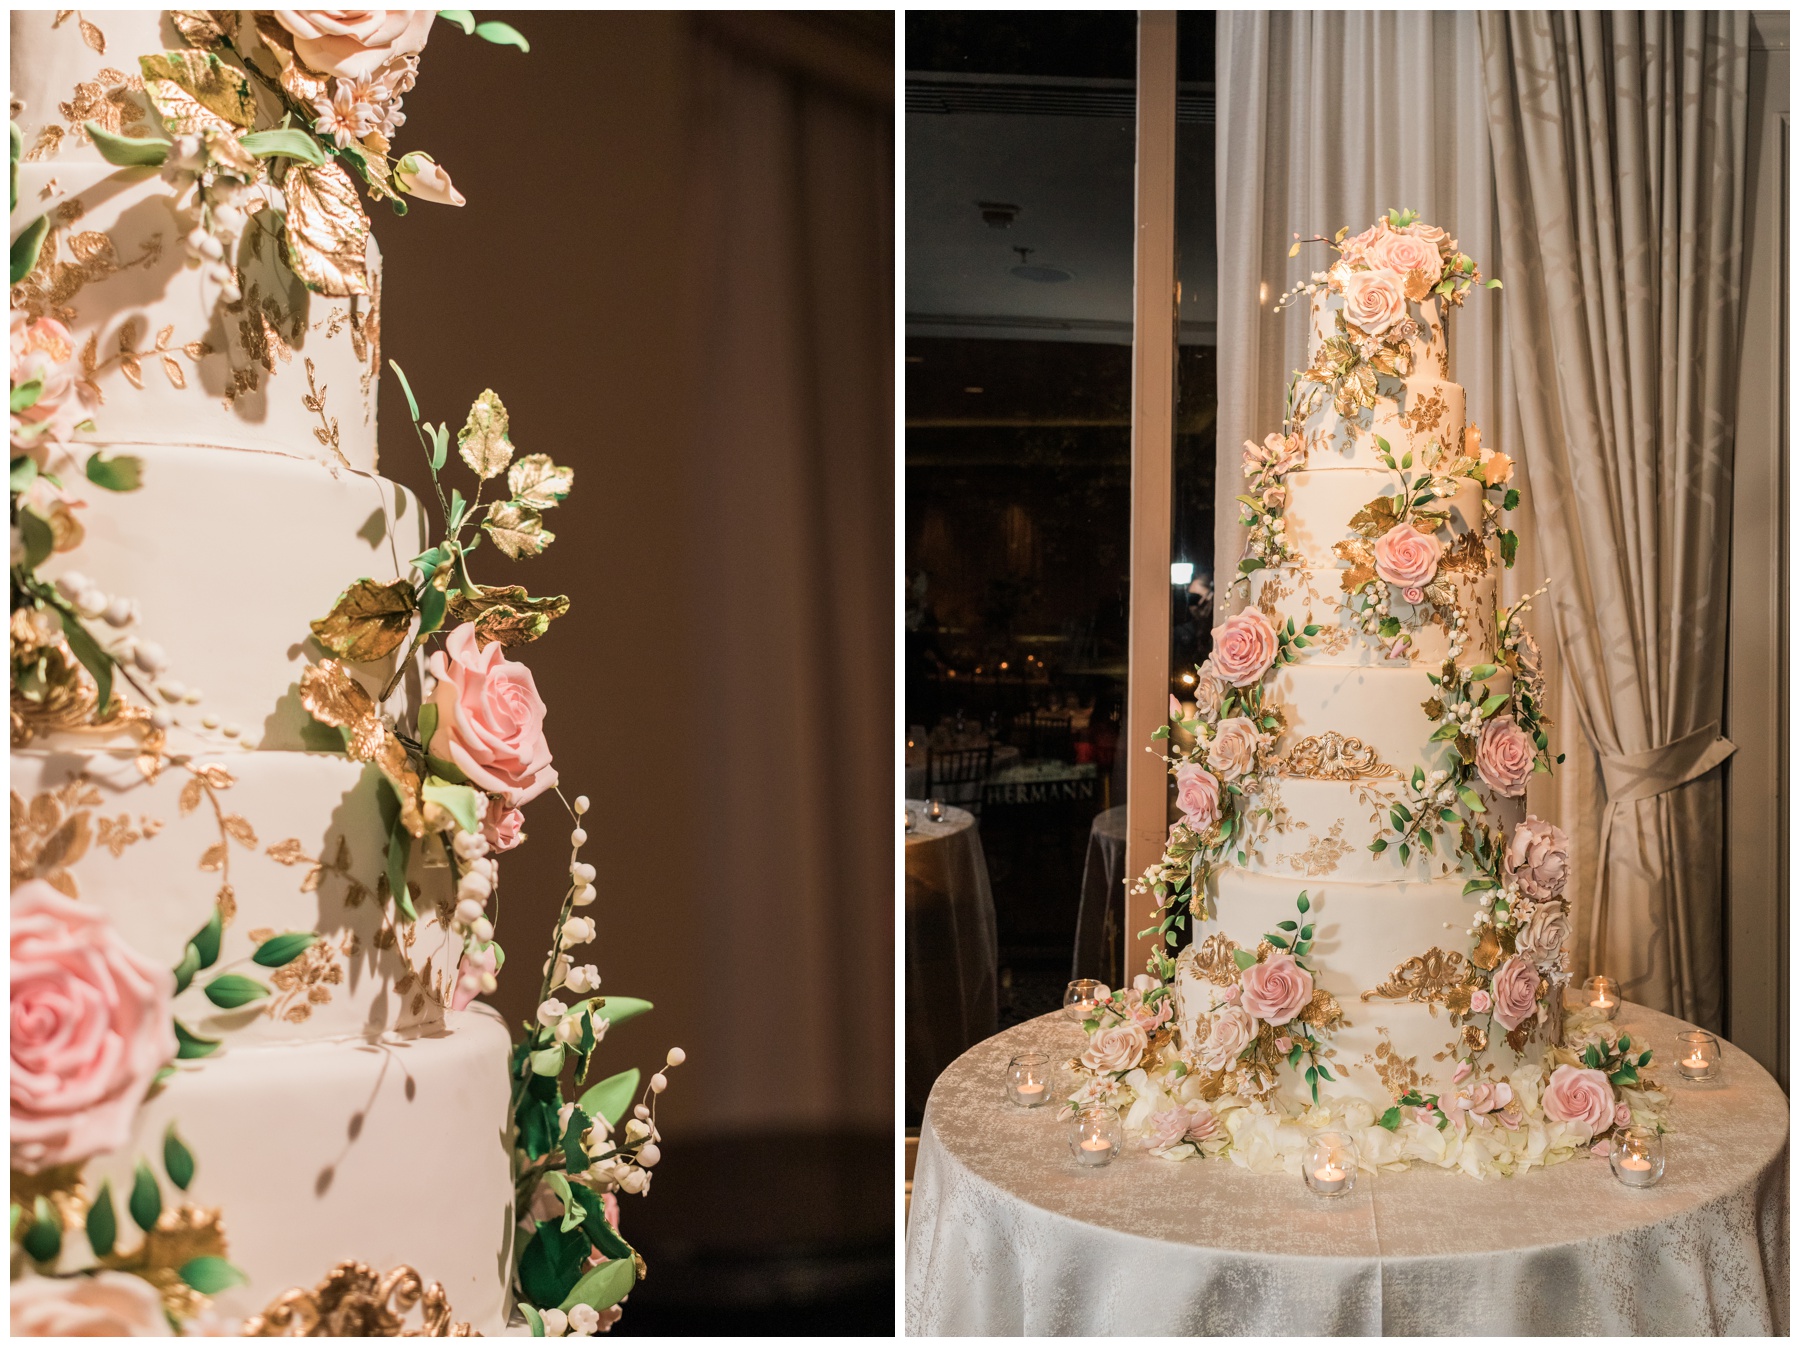 Pastel pink and white details for a feminine reception